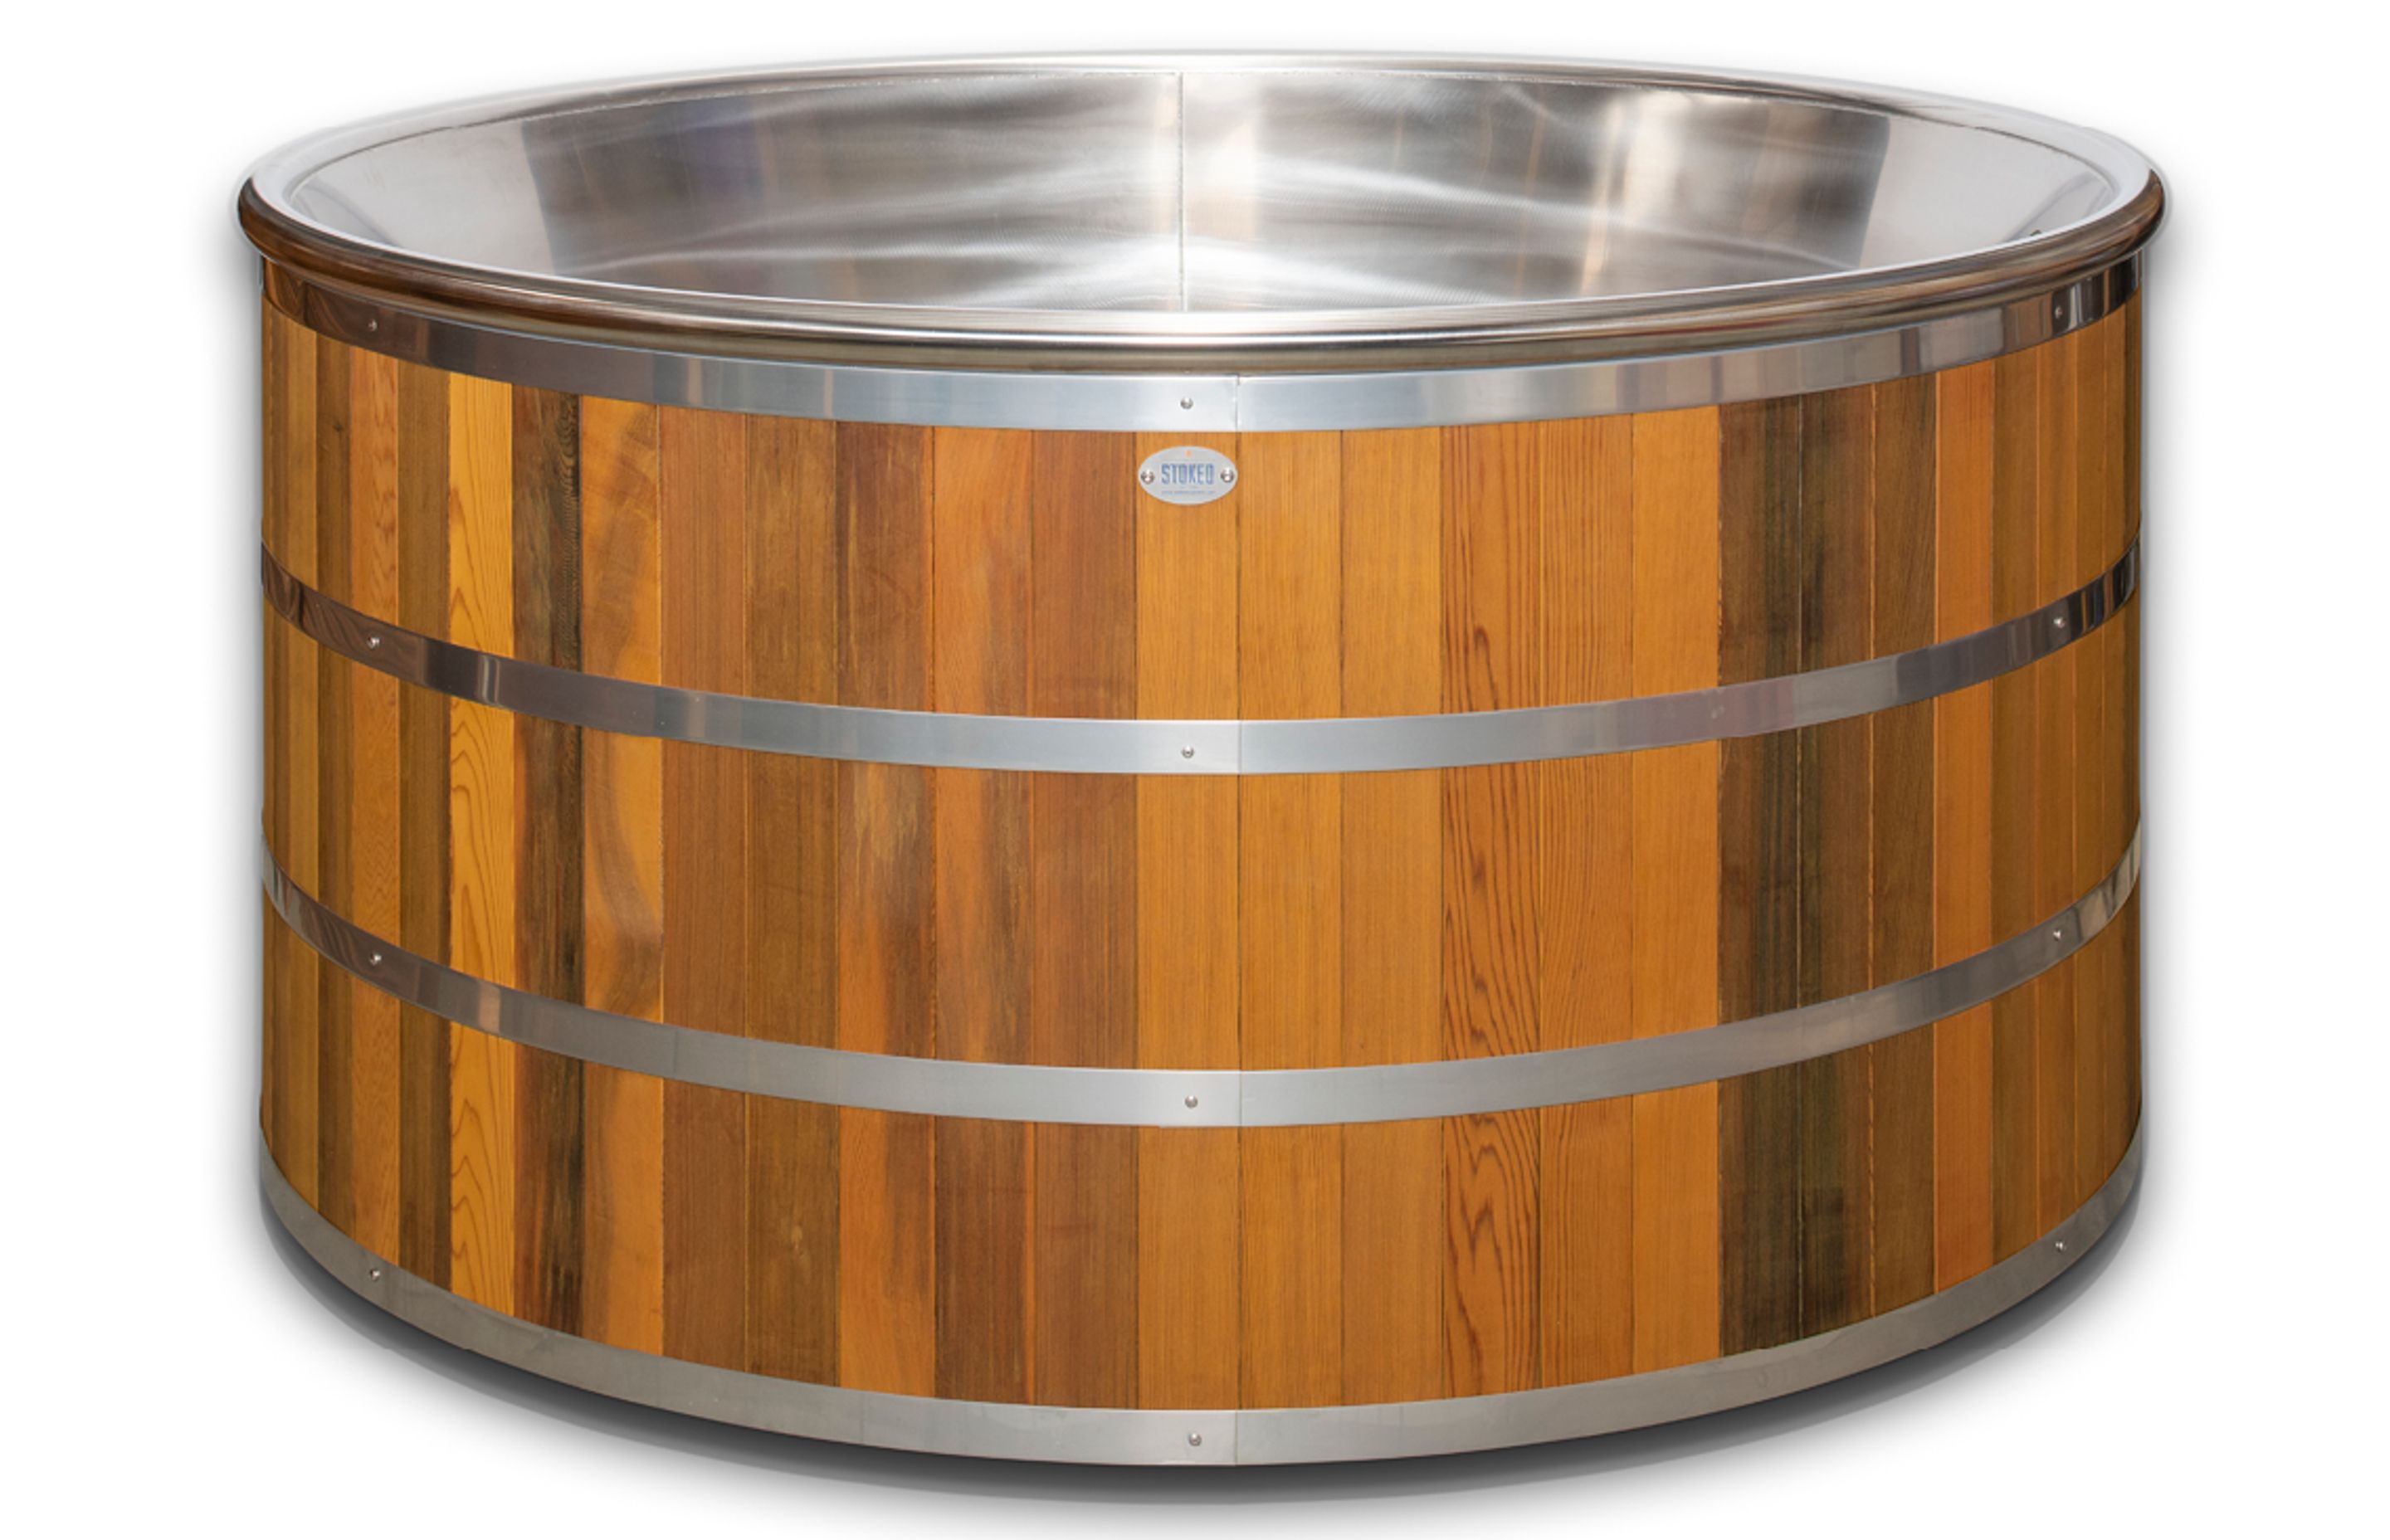 The singular combination of cedar and stainless steel has seen the Stoked Stainless products be in high demand from customers around the world.